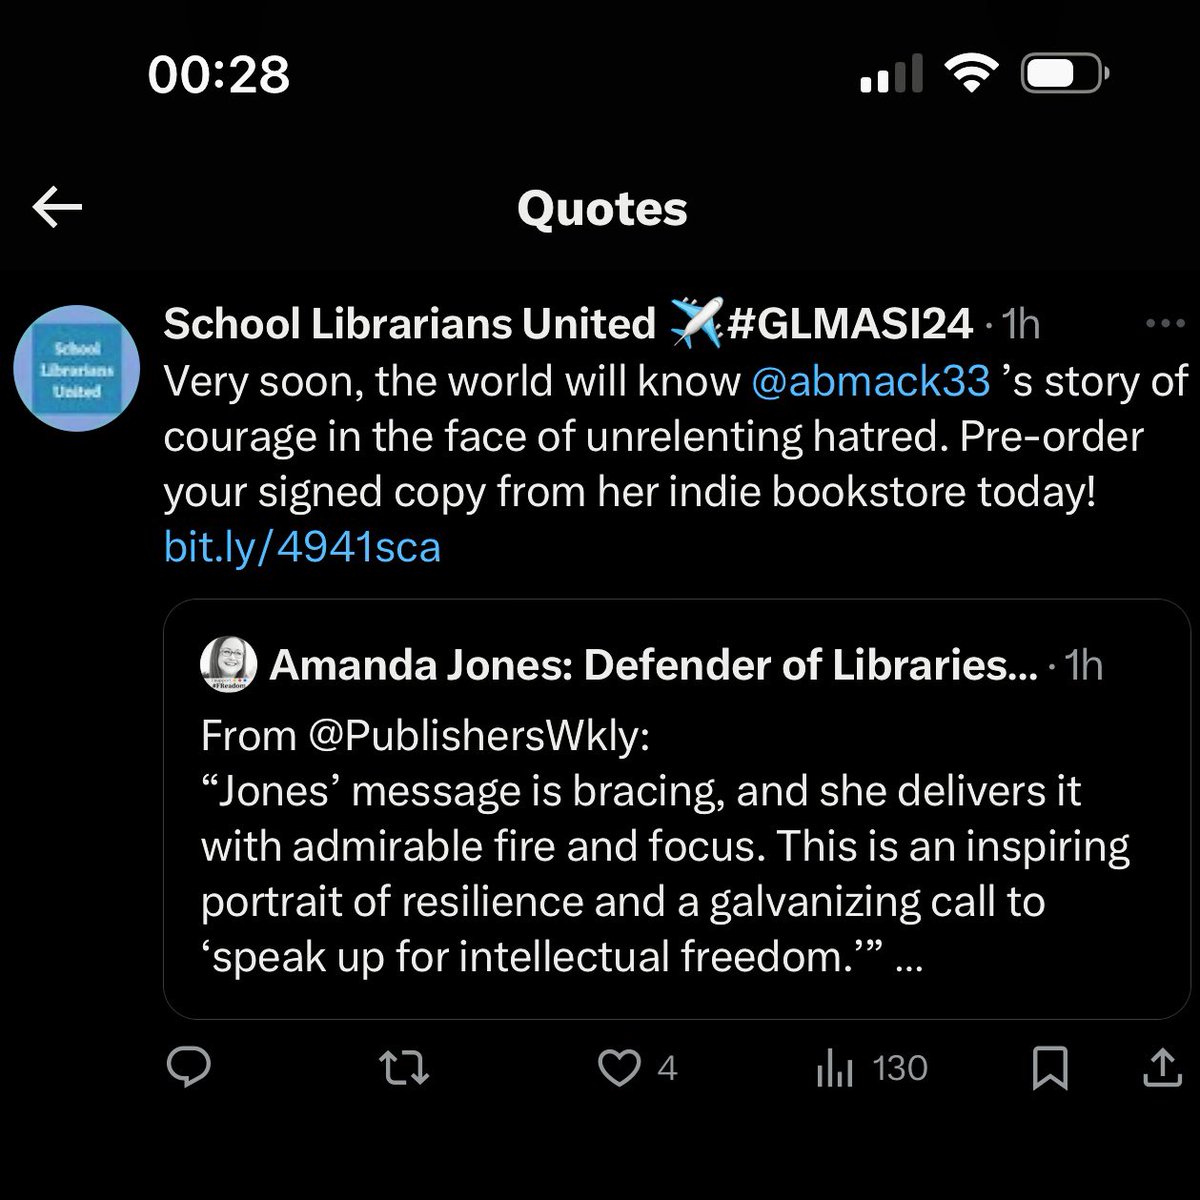 Gr**mers love each other. 

Imagine. Exposing school librarians gr**ming school children is “unrelenting hatred” and the gr**ming itself is “courage.”

#parenting #moms #dads #lalege

#librarians #tlchat #alaac24 #ThatLibrarian #UniteAgainstBookBans @abmack33 Amanda Jones